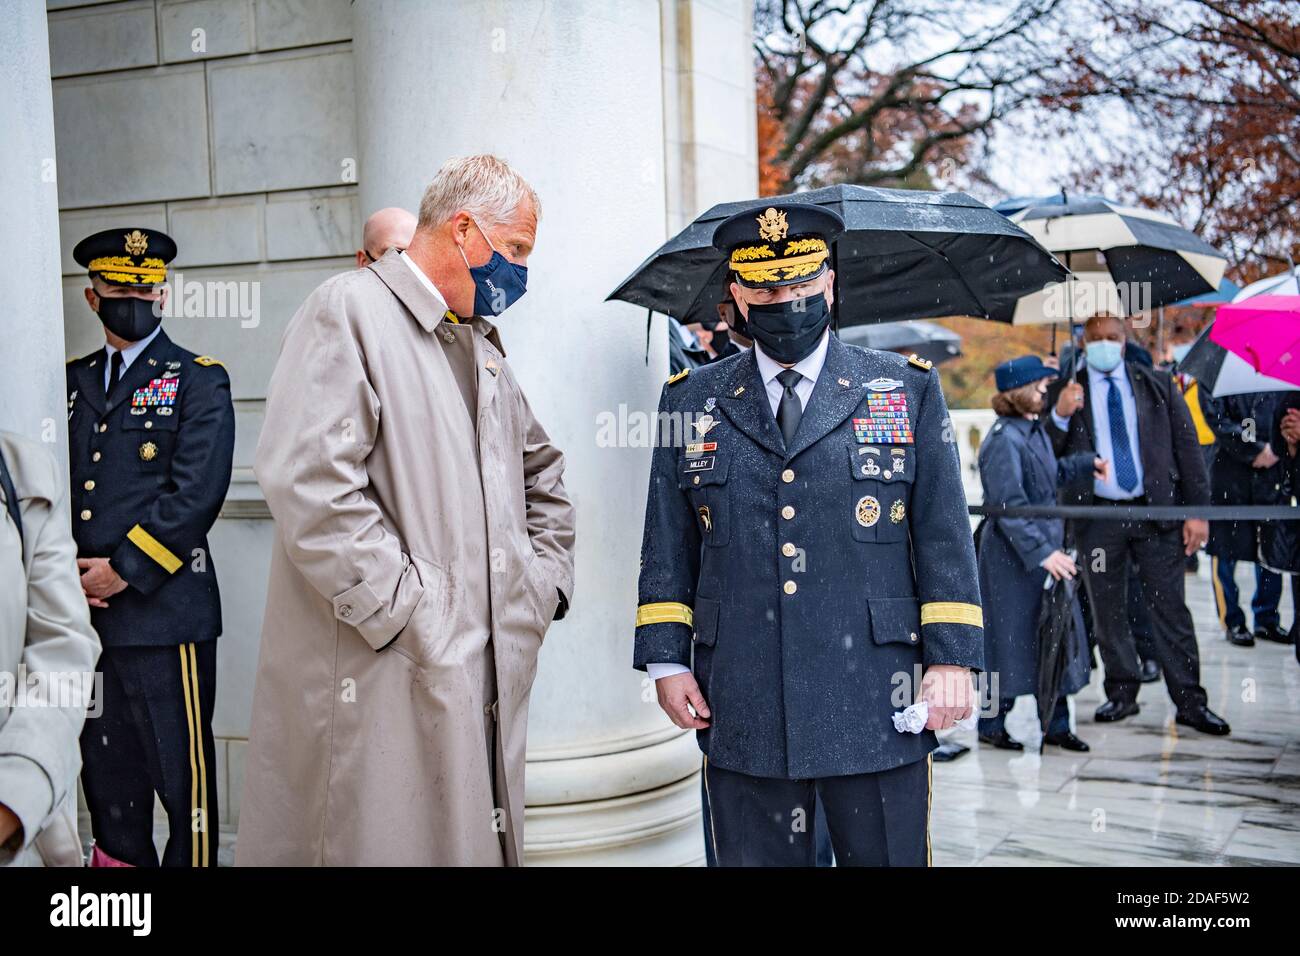 Arlington, United States Of America. 11th Nov, 2020. Arlington, United States of America. 11 November, 2020. U.S Joint Chiefs Chairman Mark Milley, right, stands with Acting Secretary of Defense Christopher Miller during Veterans Day events at Arlington National Cemetery November 11, 2020 in Arlington, Virginia. Credit: Elizabeth Fraser/U.S. Army Photo/Alamy Live News Stock Photo